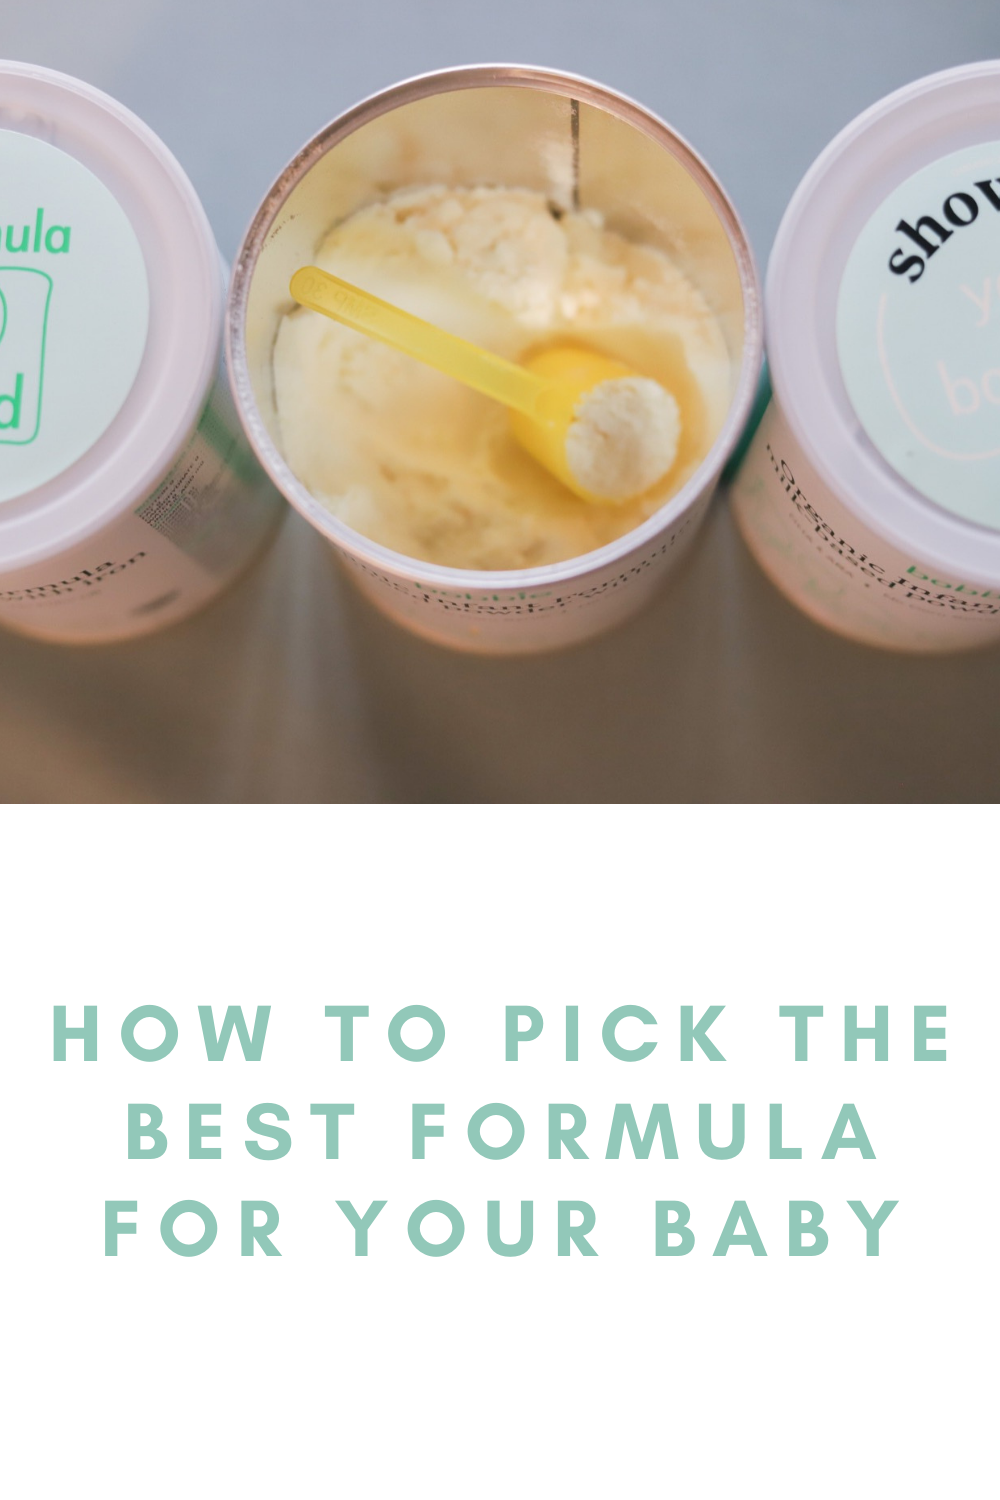 How to Pick the Best Formula for your Baby, organic baby formula, bobbie formula, bobbie discount code, formula without palm oil or corn syrup, how to choose a baby formula powder, combo fed, feeding twins